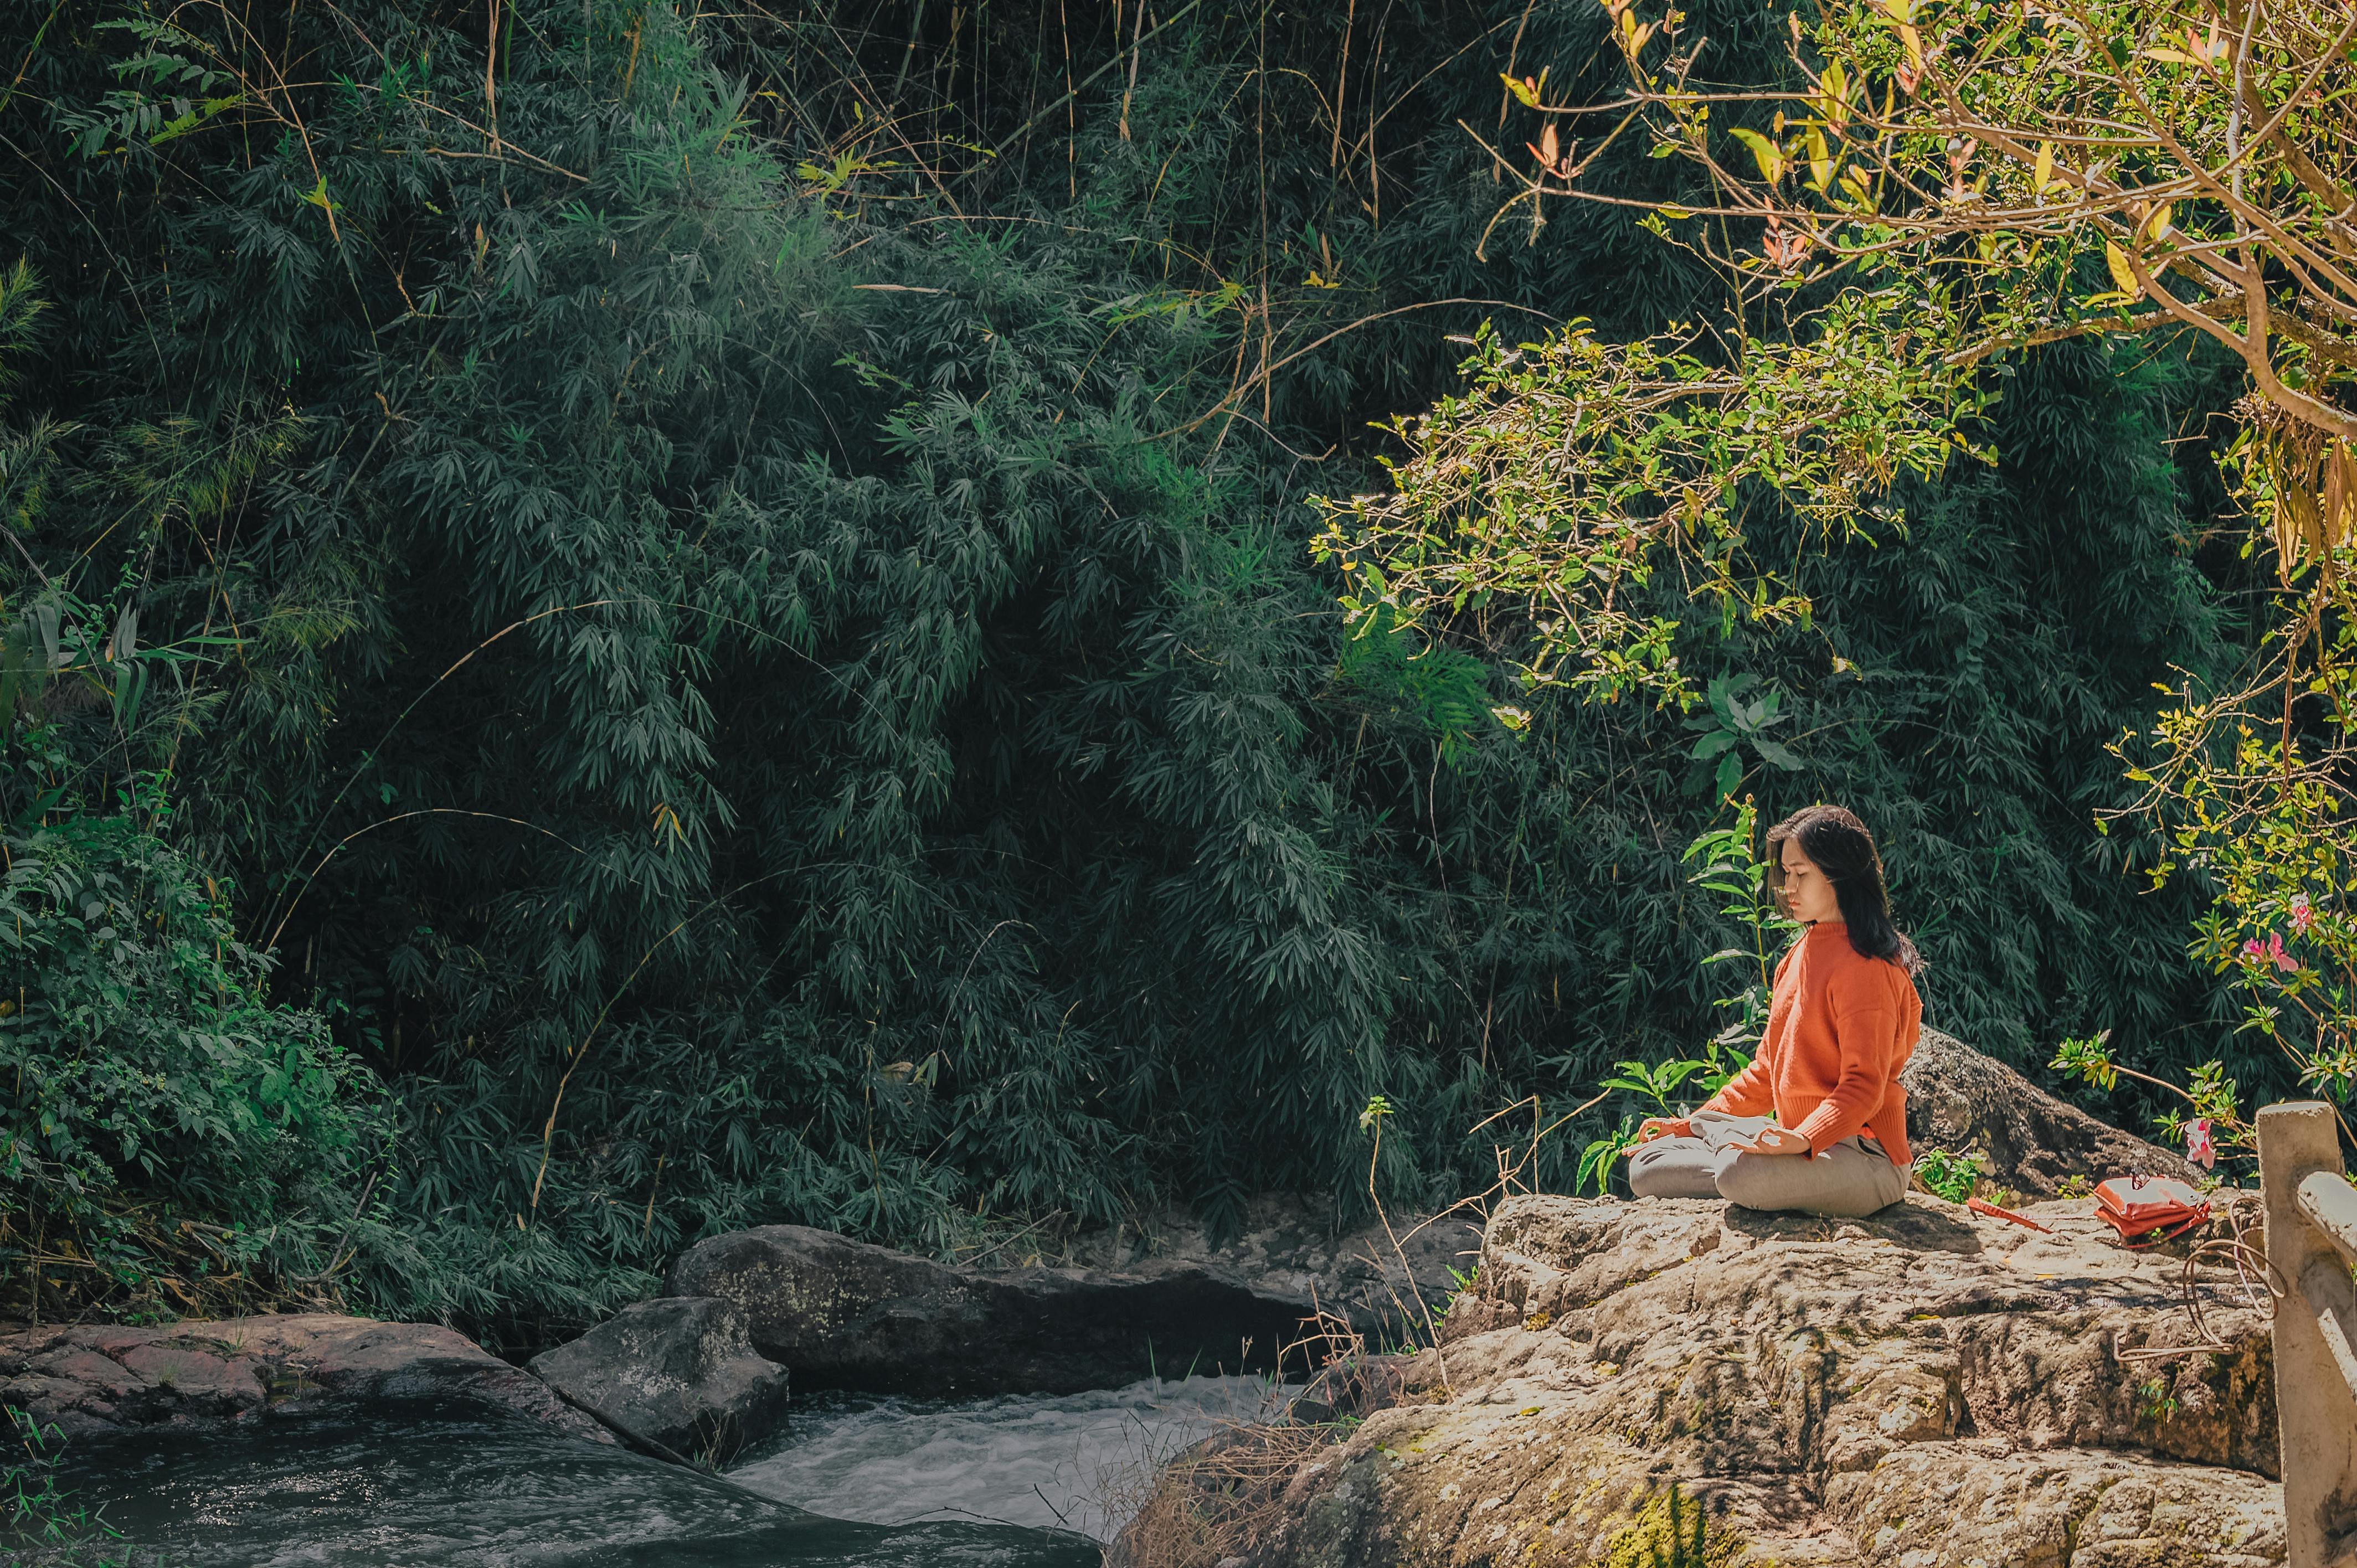 Girl in orange shirt meditating besides a rivulet with bamboo forest in the background